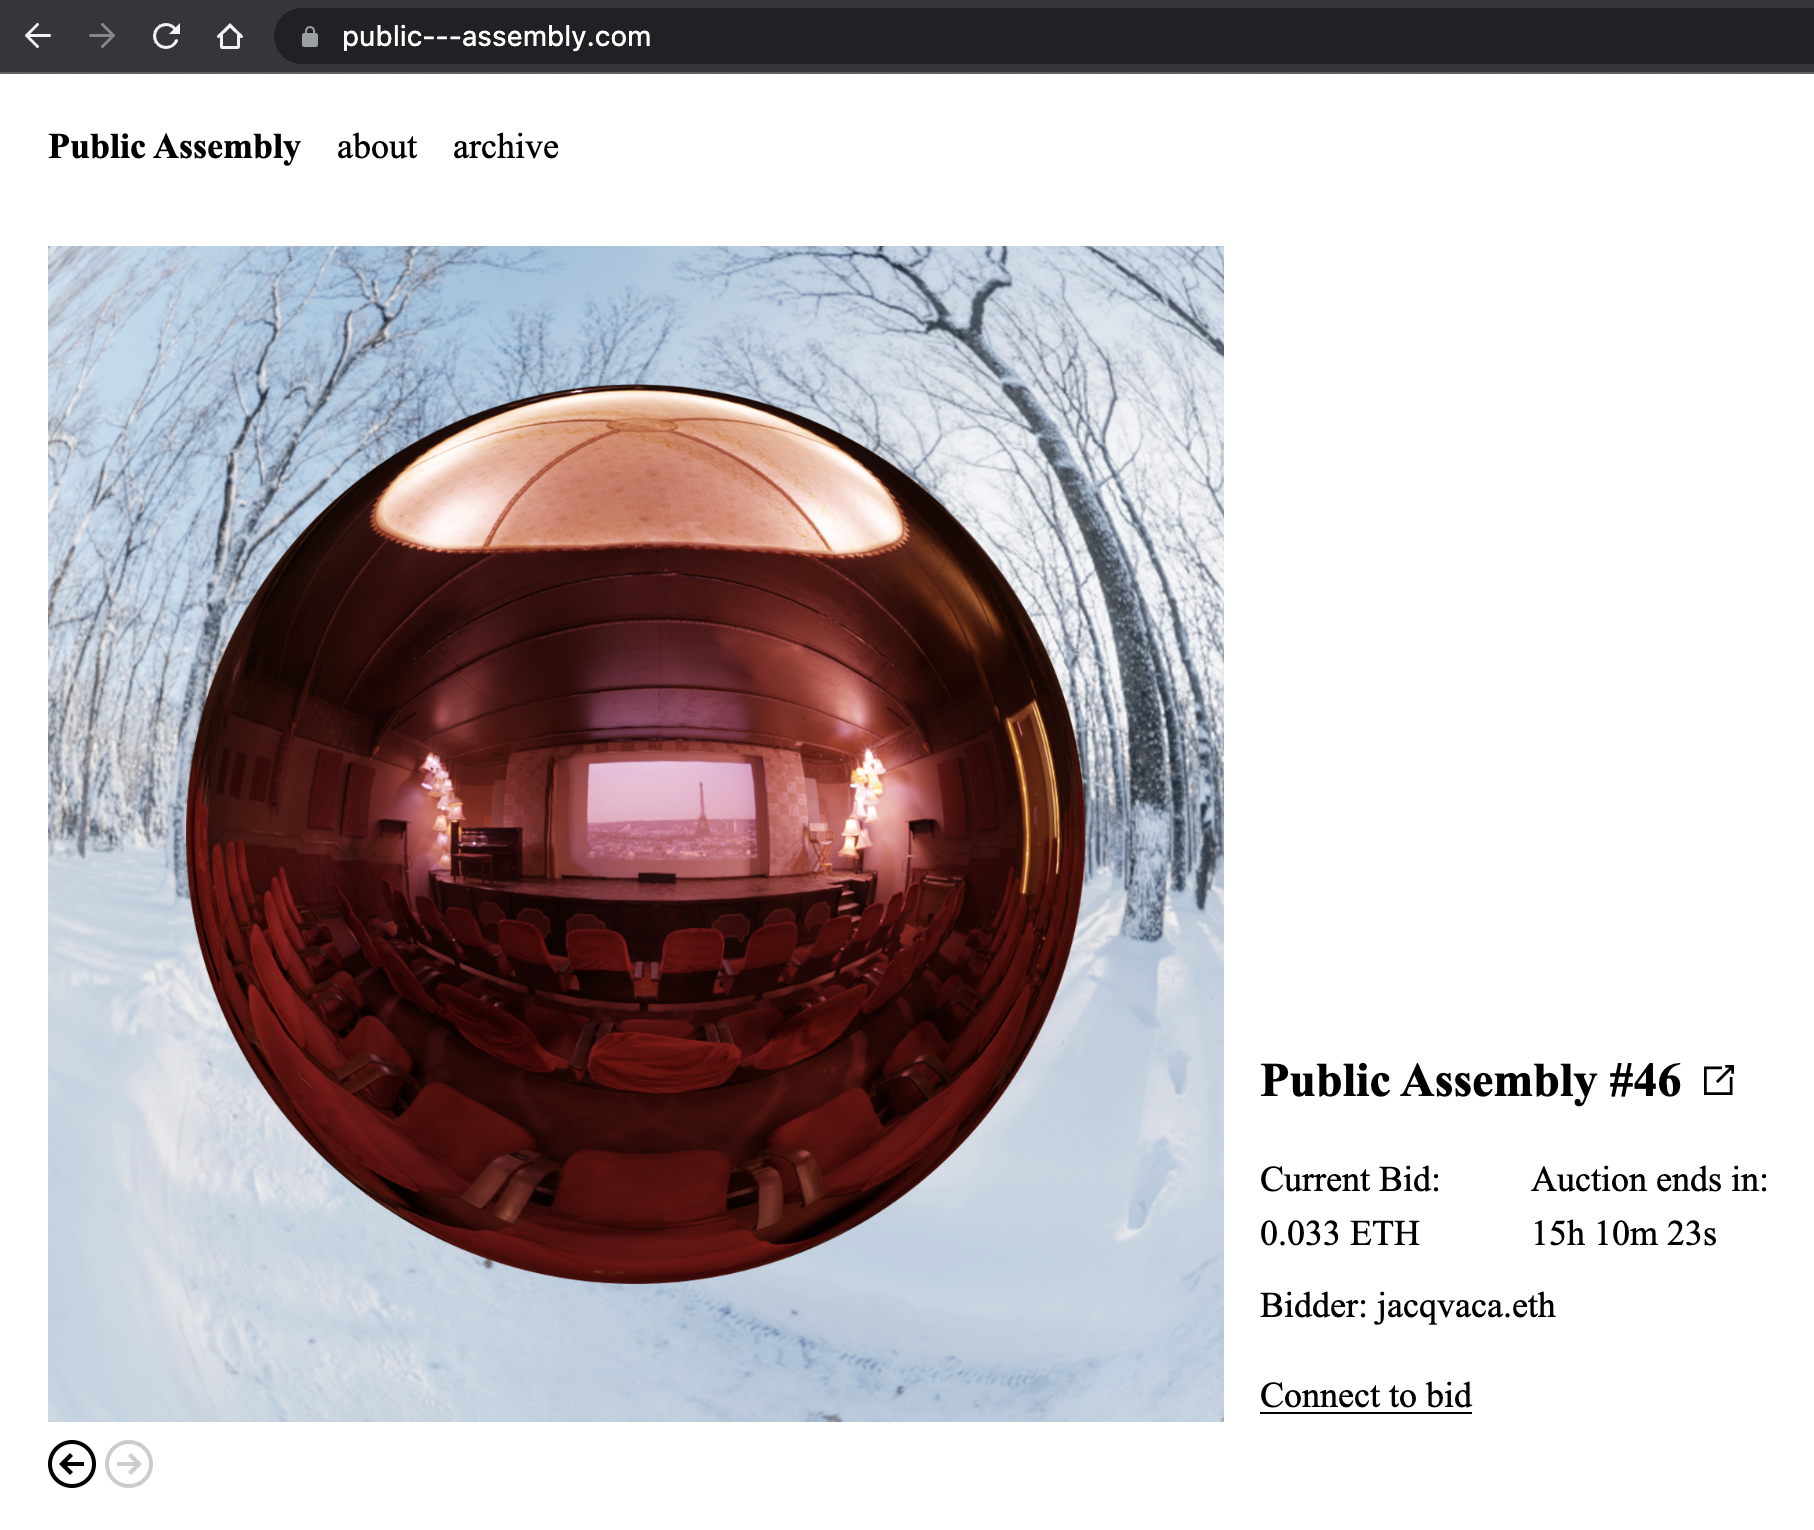 Screenshot from public---assembly.com